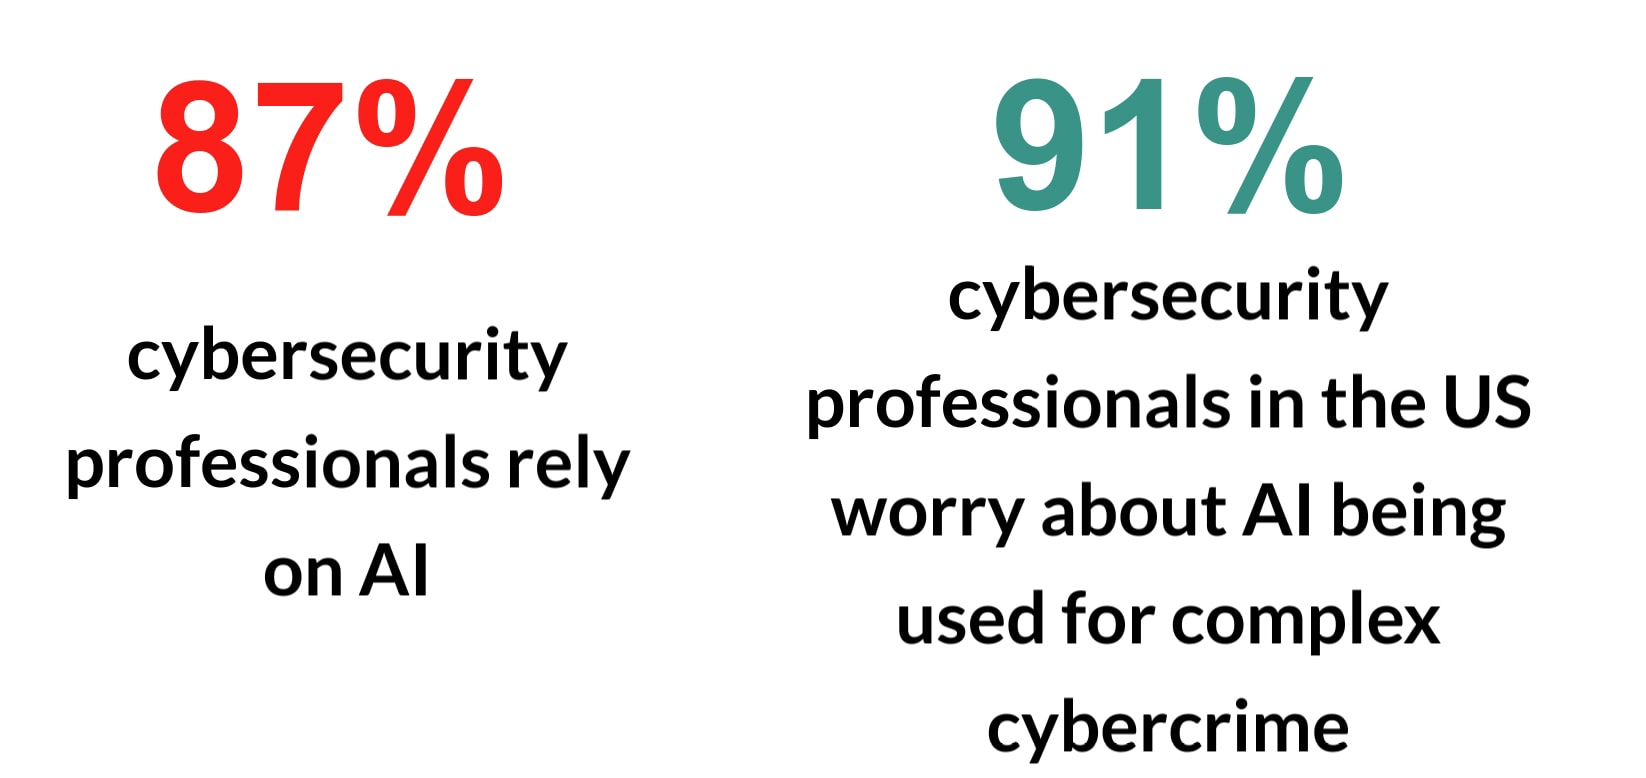 Visual representation of how many cybersecurity professionals in the US rely on AI, as well as how many of them are concerned about AI being used for crime, displayed in percentages.